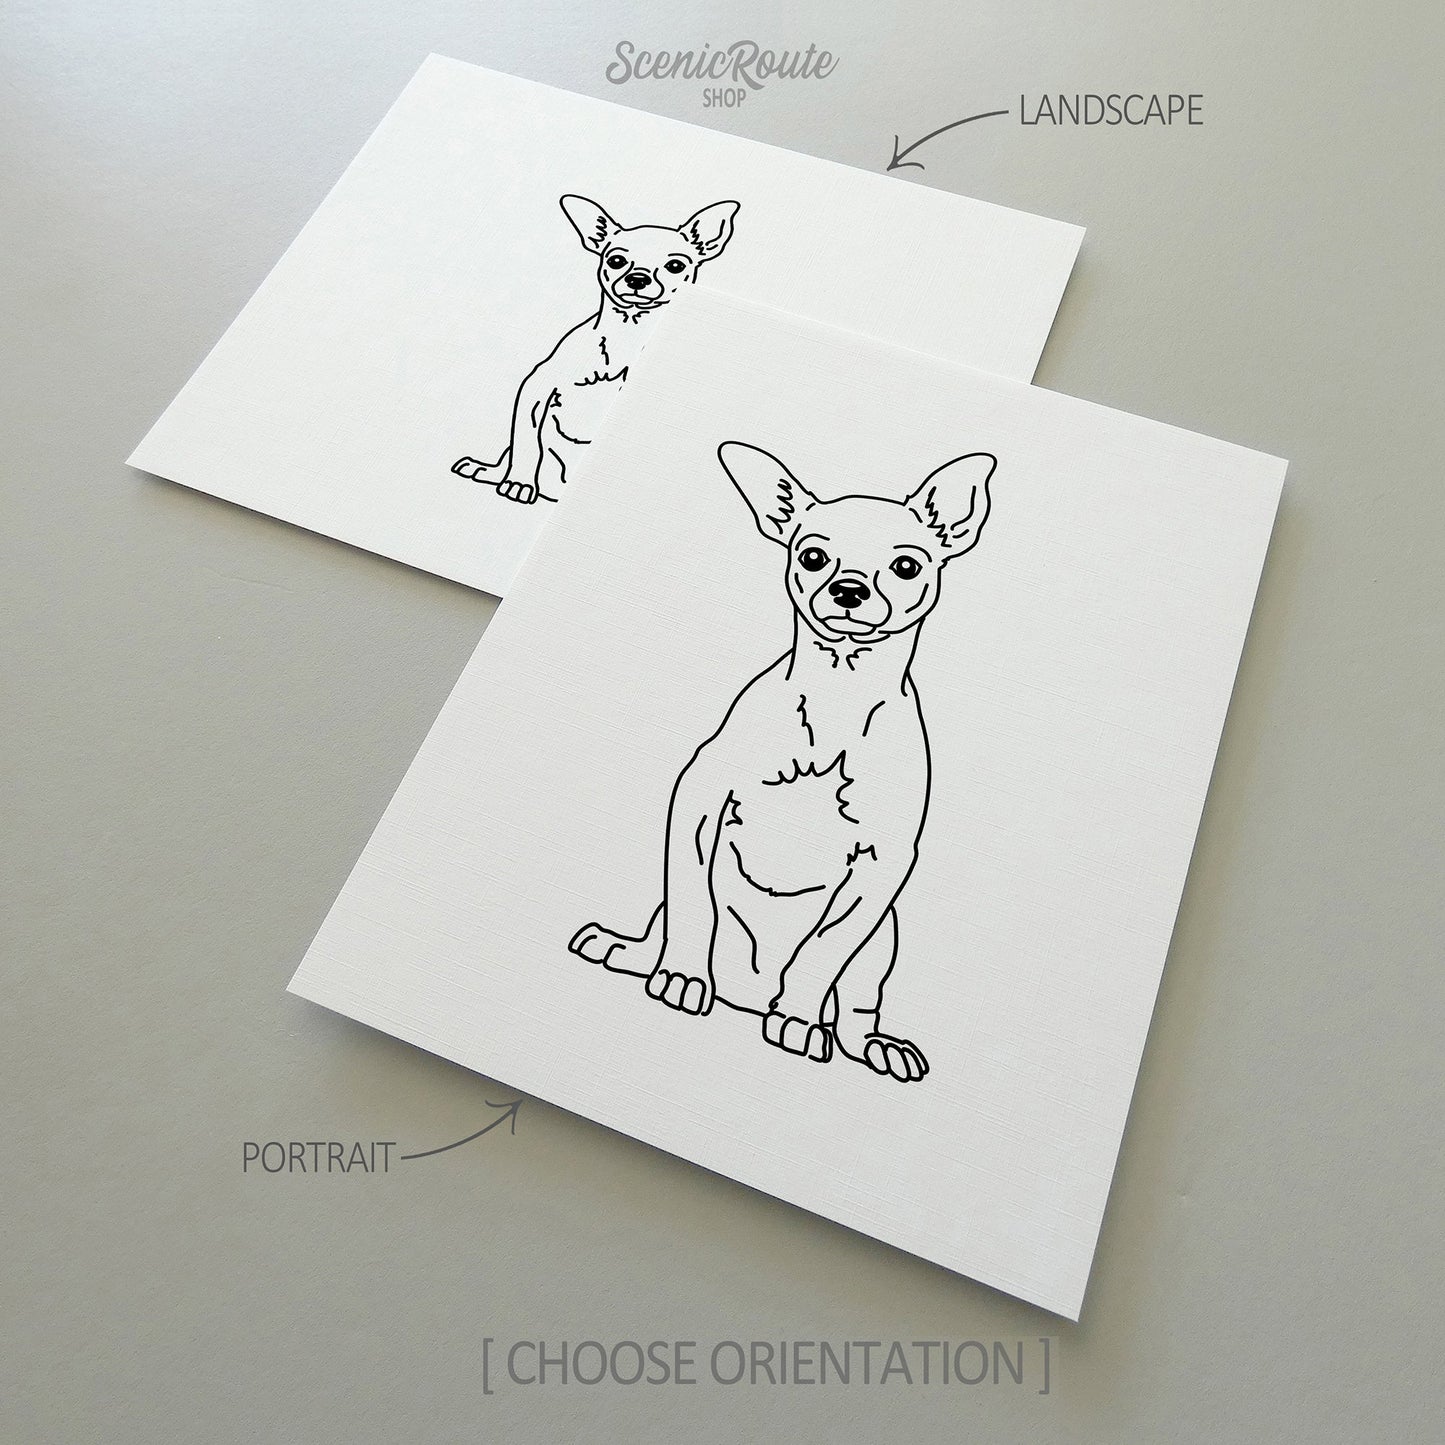 Two drawings of a Chihuahua dog on white linen paper with a gray background.  Pieces are shown in portrait and landscape orientation options to illustrate the available art print options.